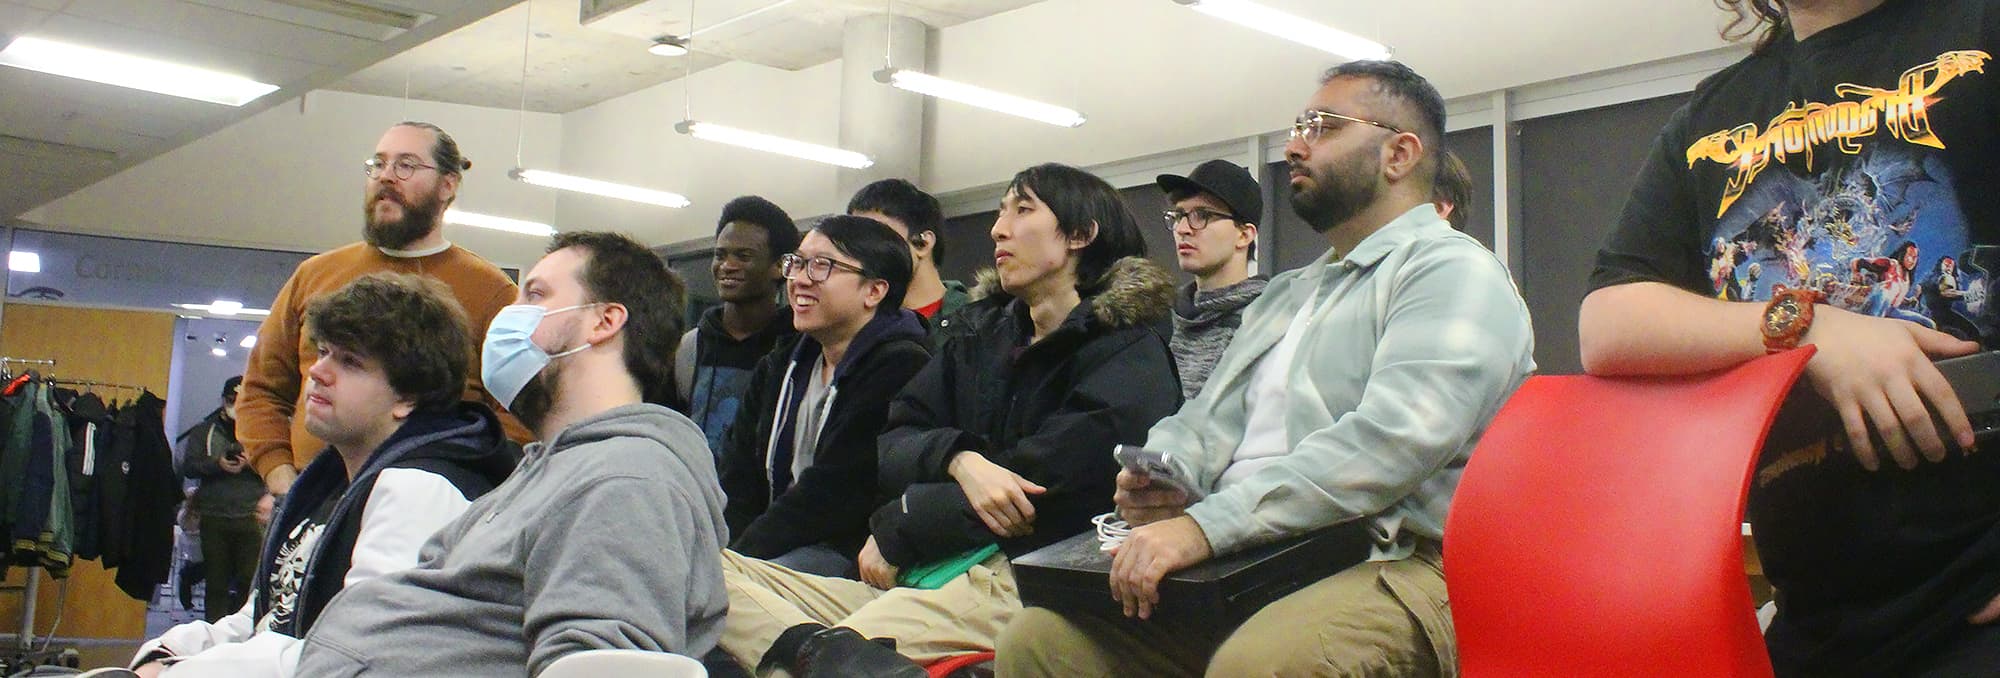 Competitors gather around to watch the Under Night In-Birth 2 bracket at the event.